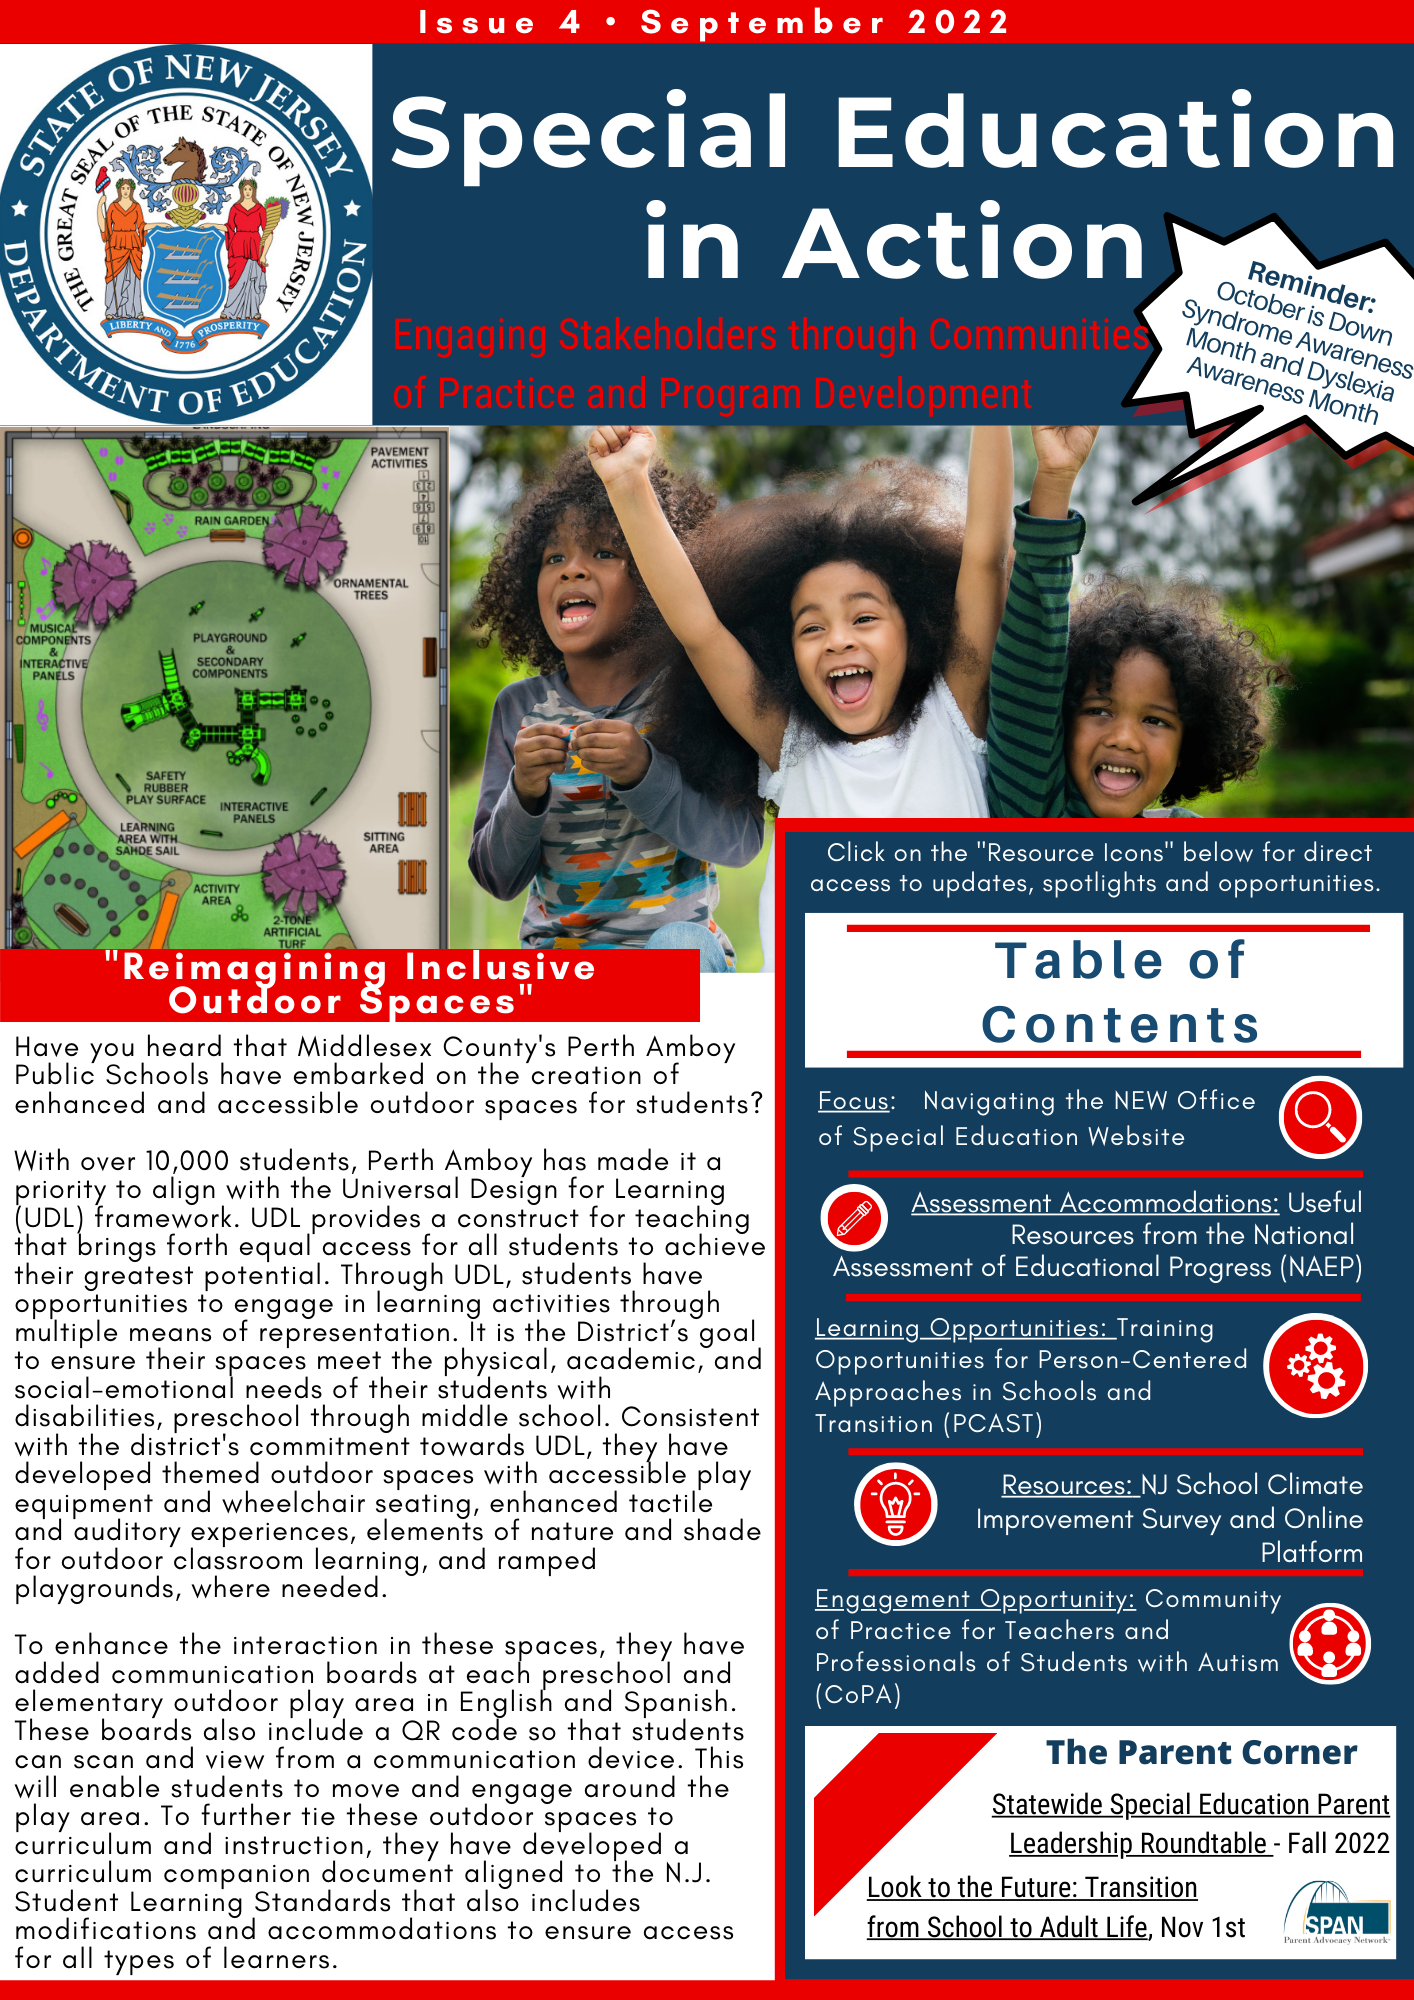 The cover of the 4th issued newsletter for special education in action